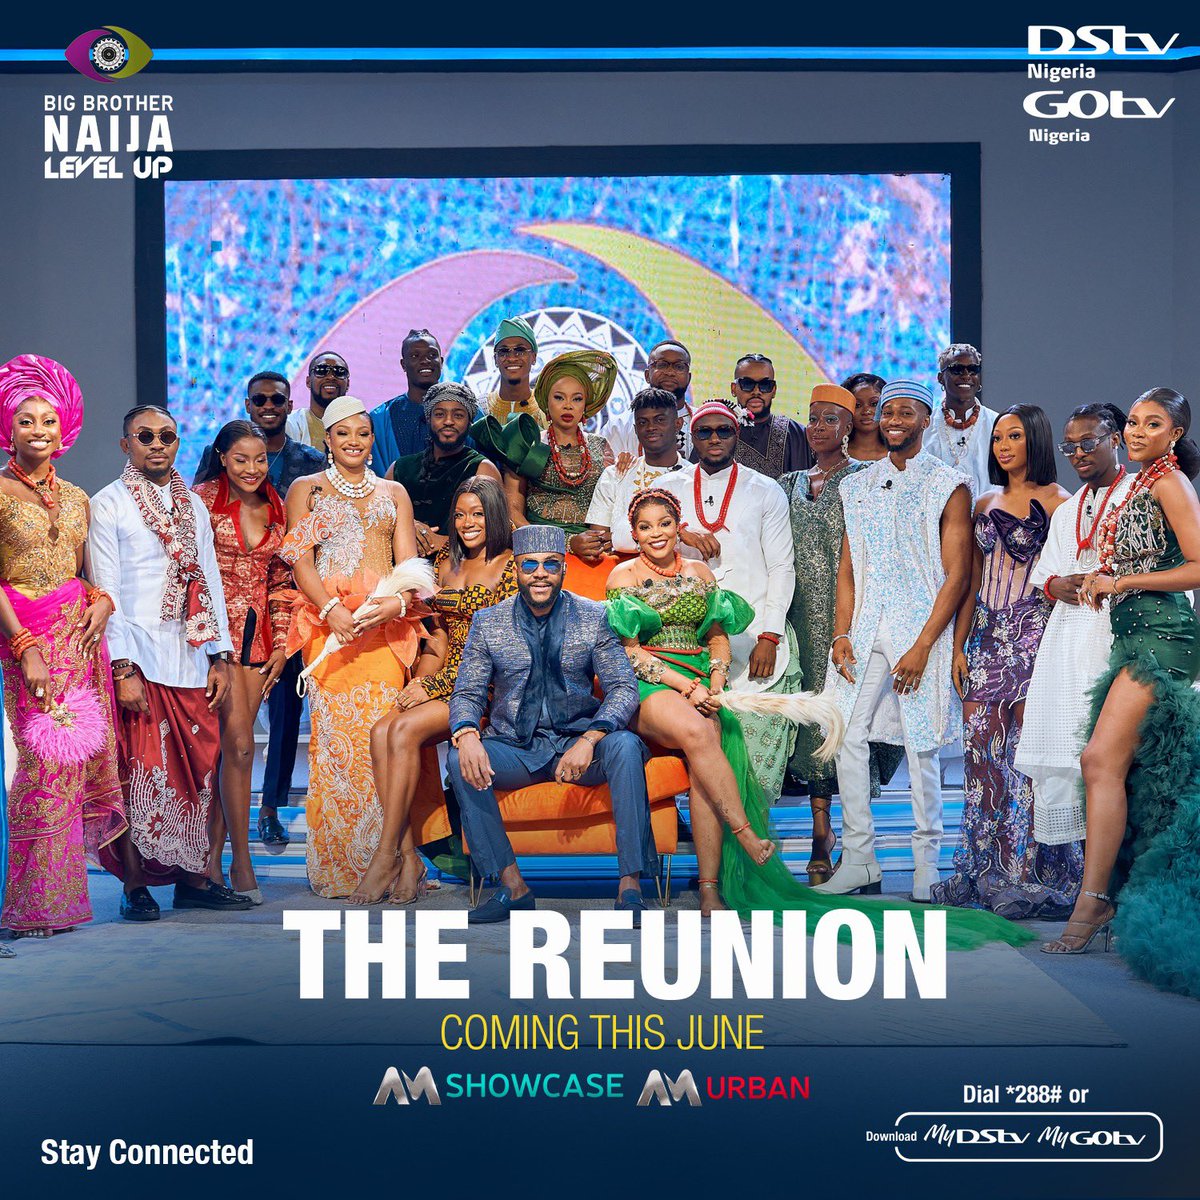 #BBNaija Level Up Reunion is coming this June.